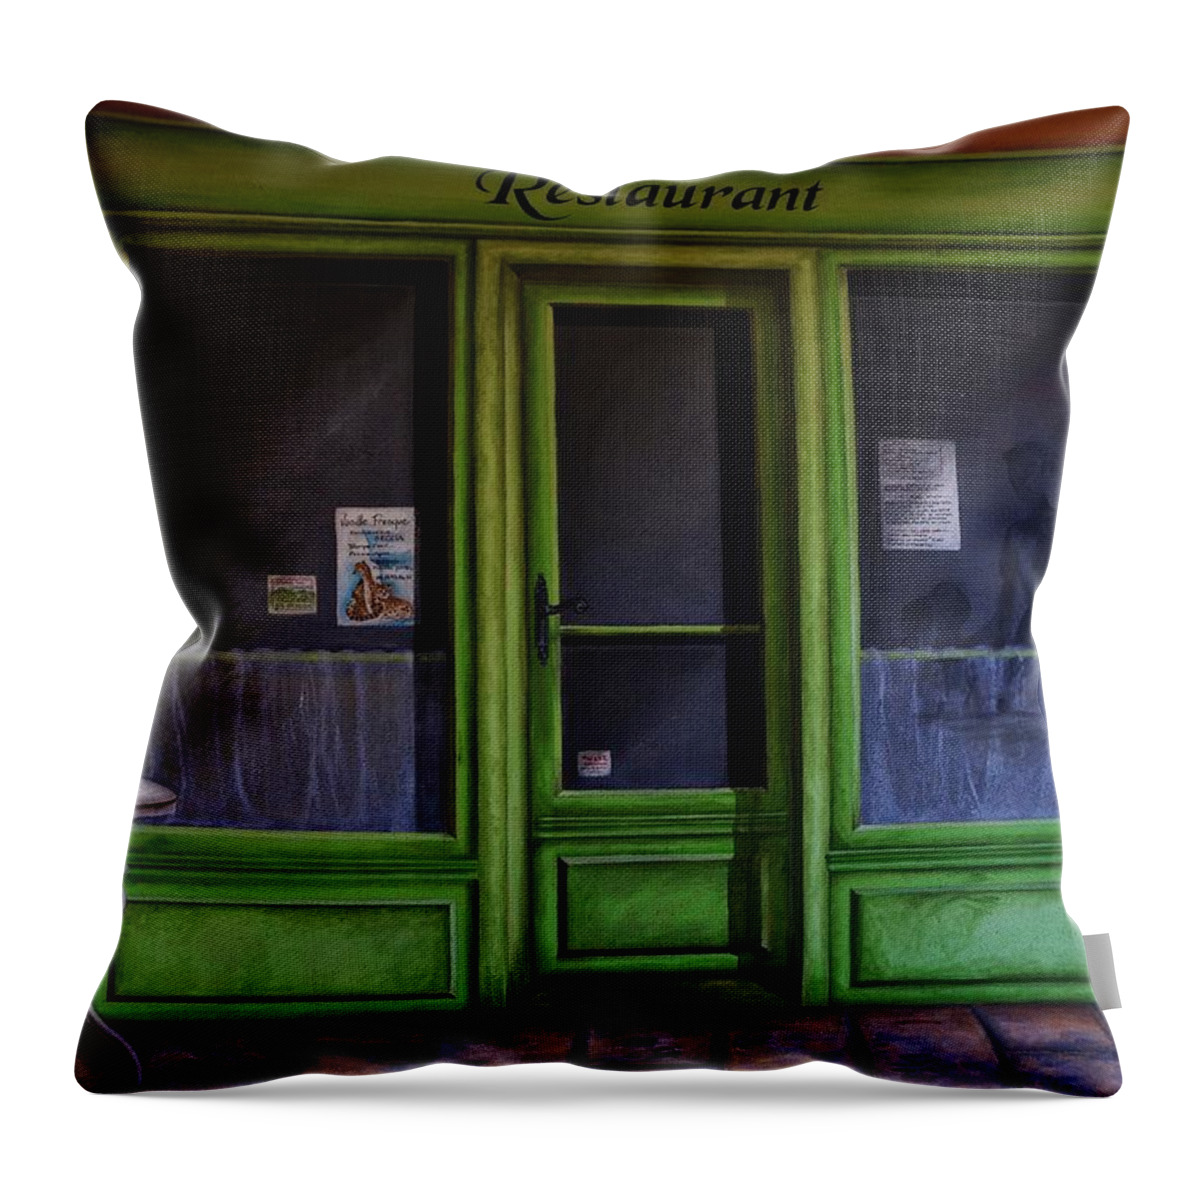 Restaurant Throw Pillow featuring the photograph Le Restaurant by Dany Lison